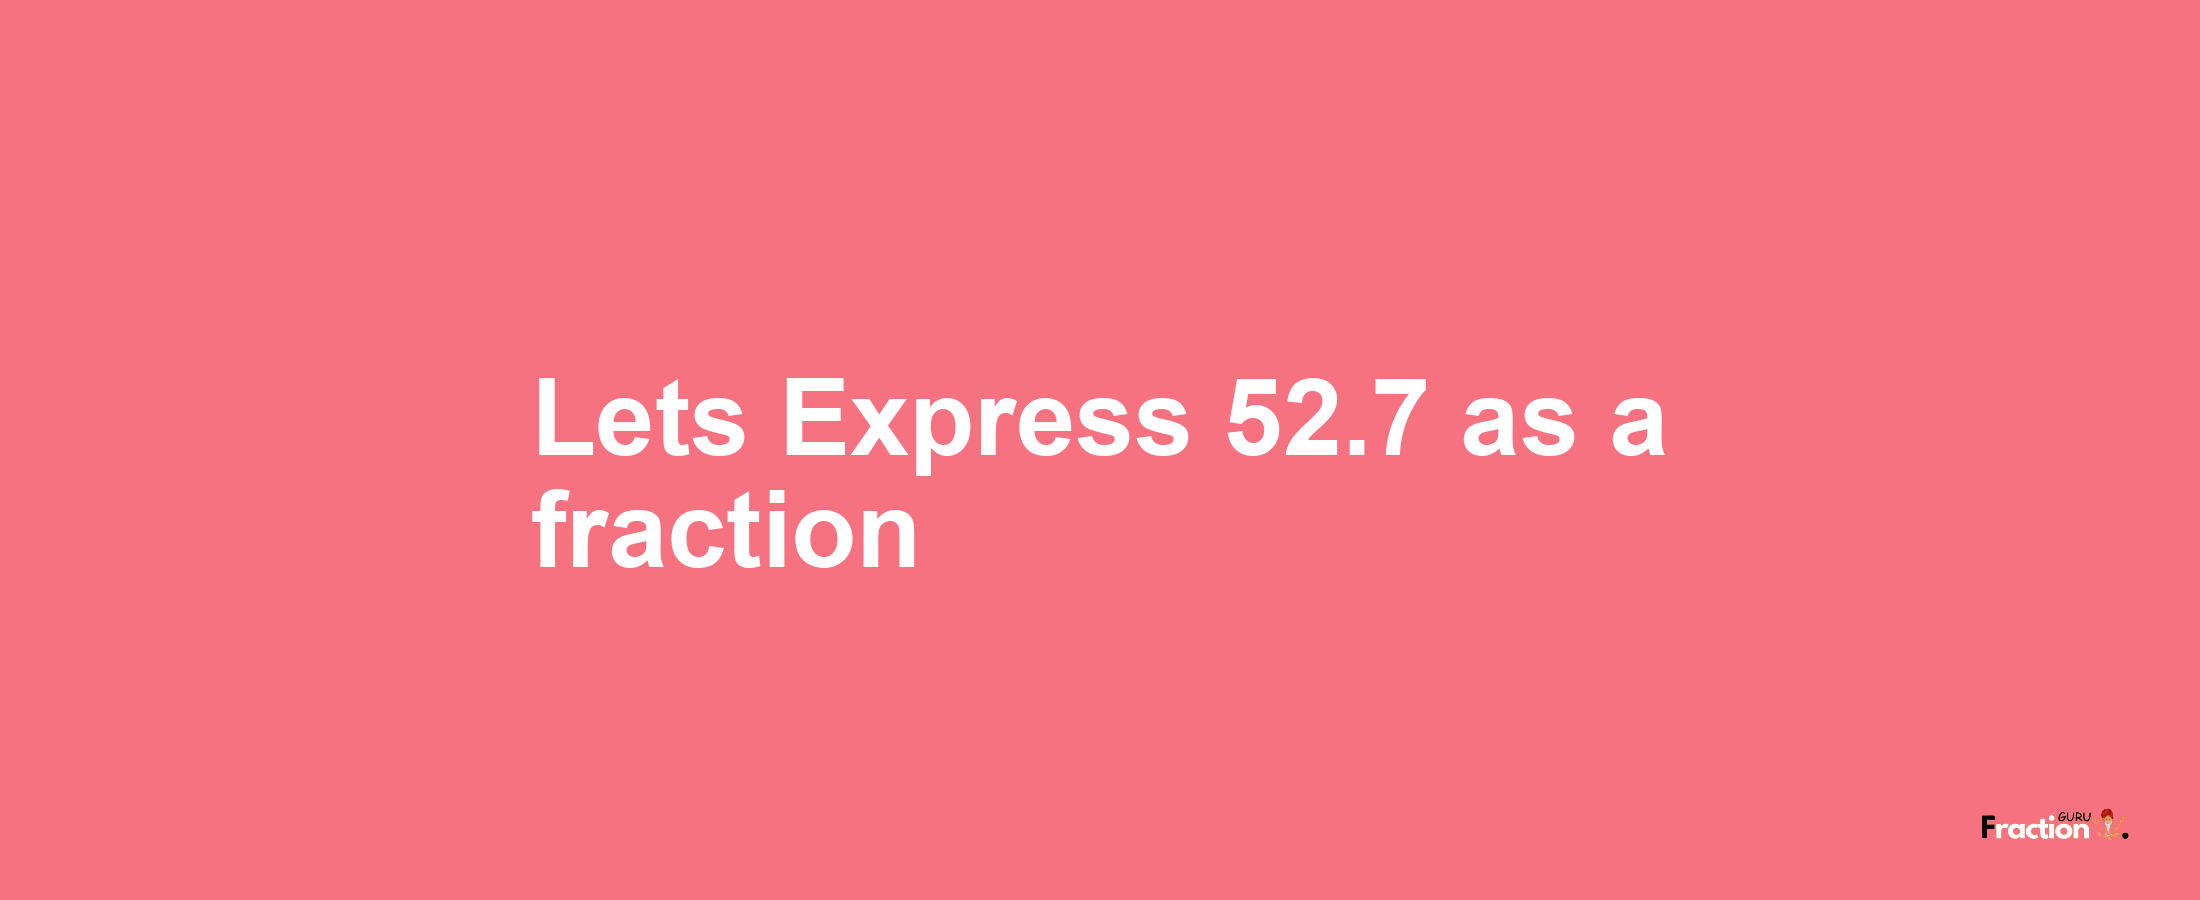 Lets Express 52.7 as afraction